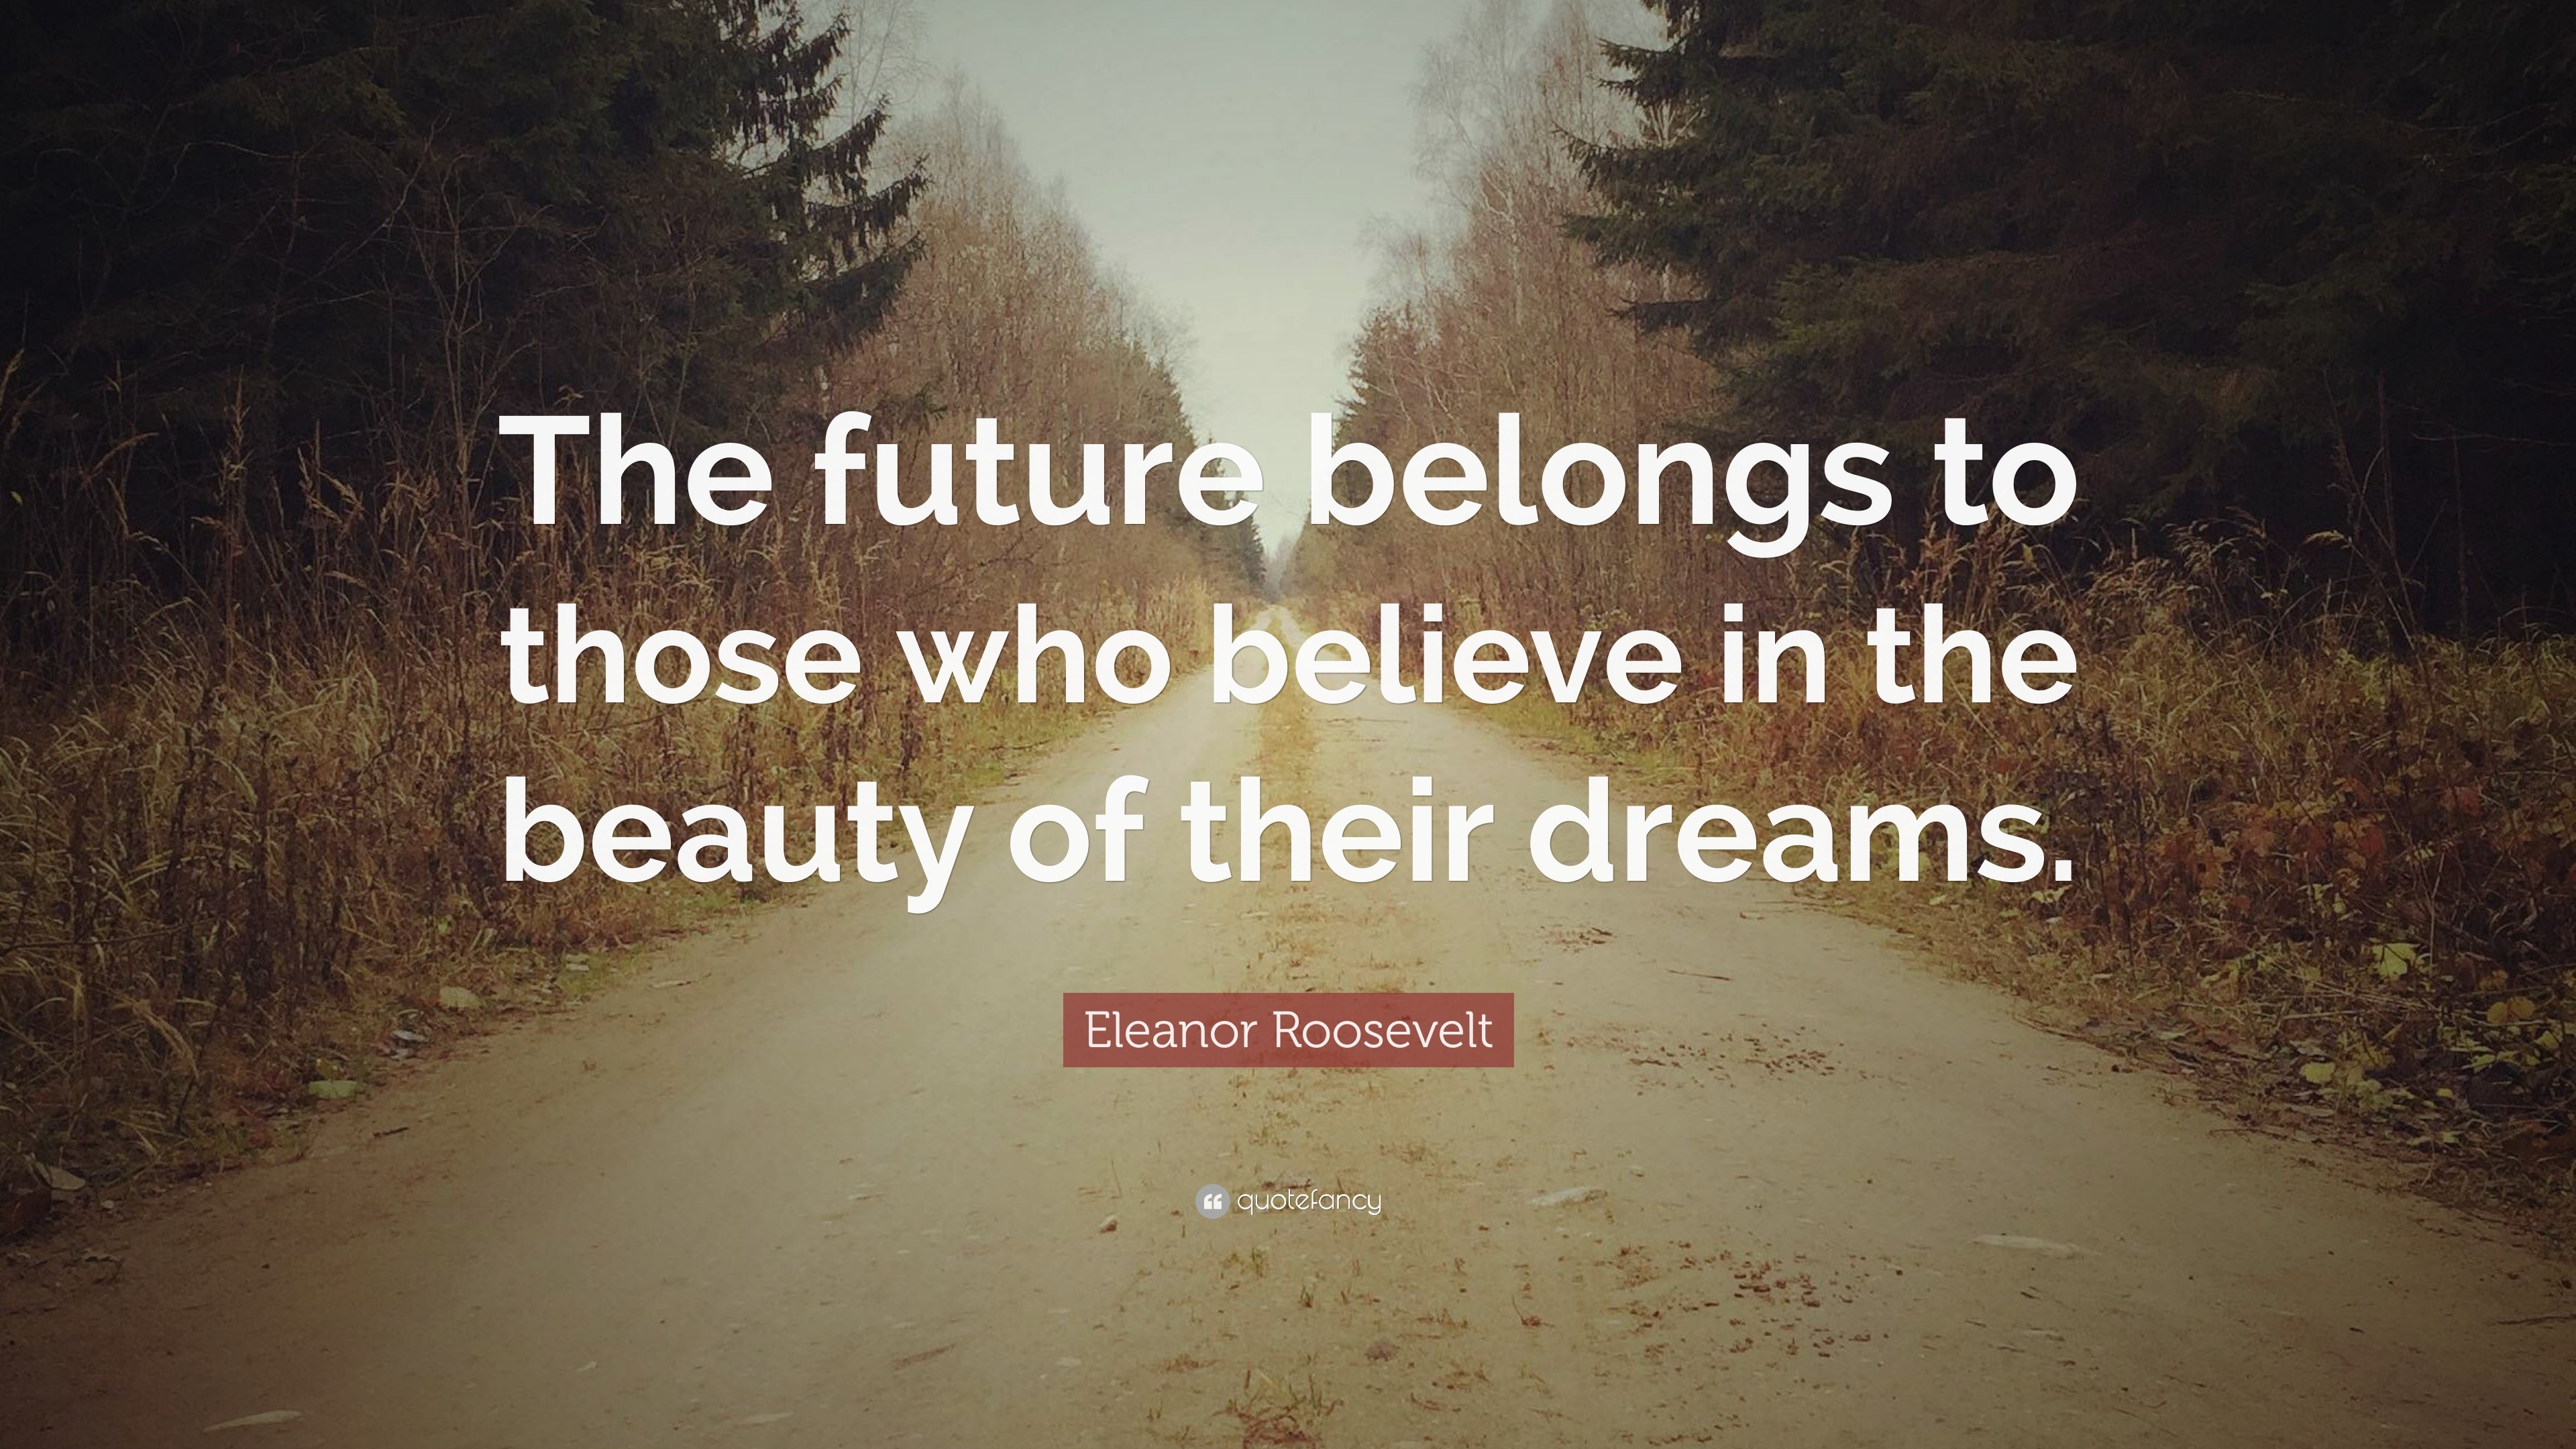 Eleanor Roosevelt Quote: “The future belongs to those who believe in